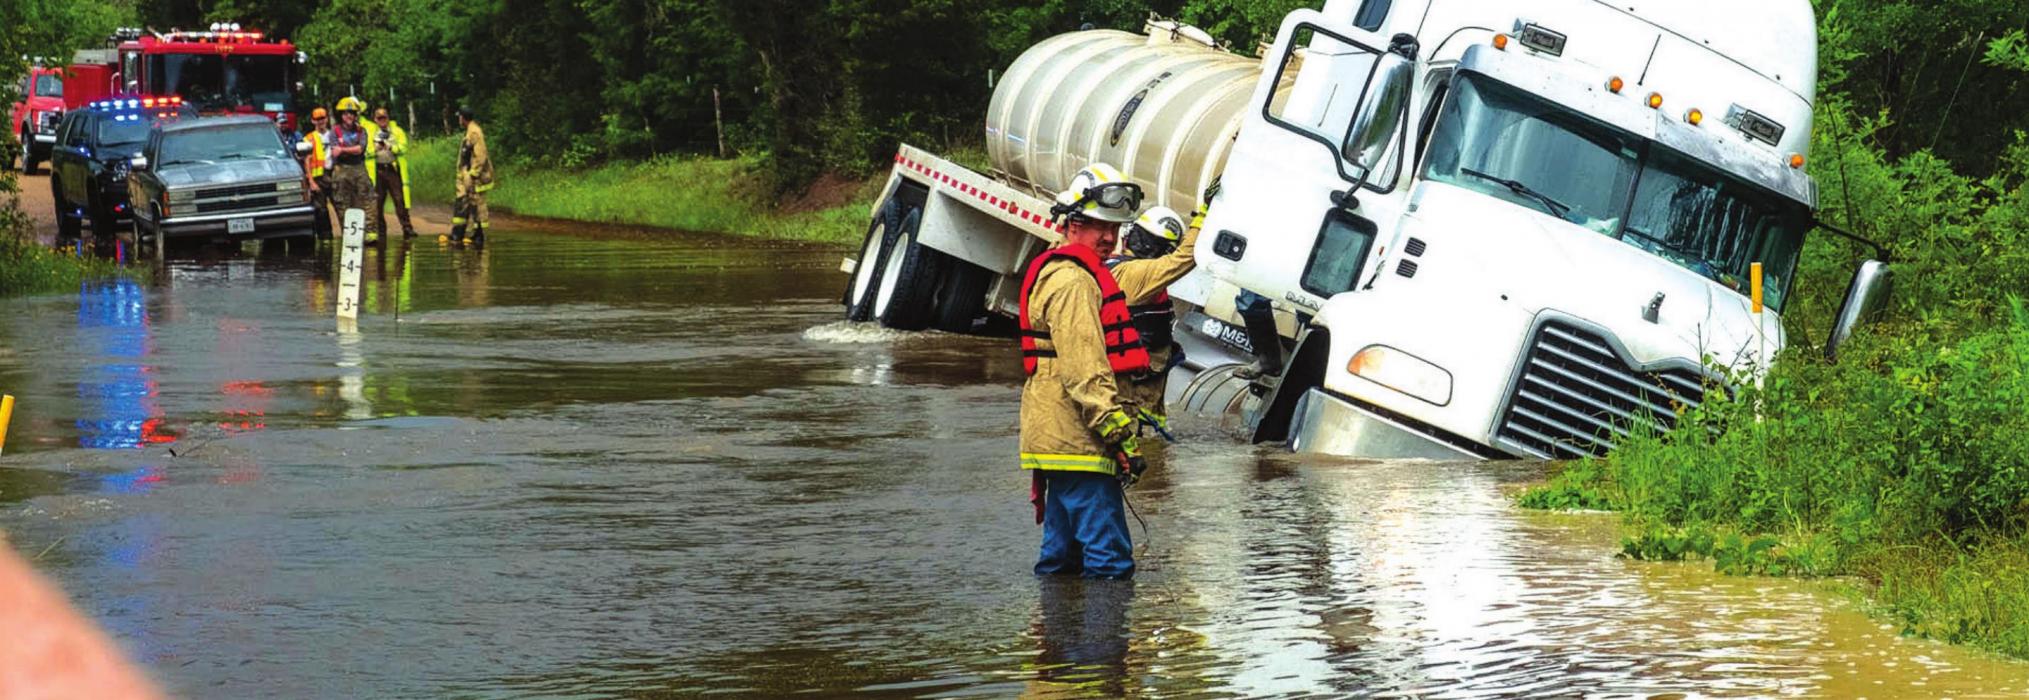 Ledbetter firefighters get ready to rescue local truck driver Tomas Garza after his rig washed off Goehring Road at Cummins Creek Monday afternoon. Photo by Andy Behlen